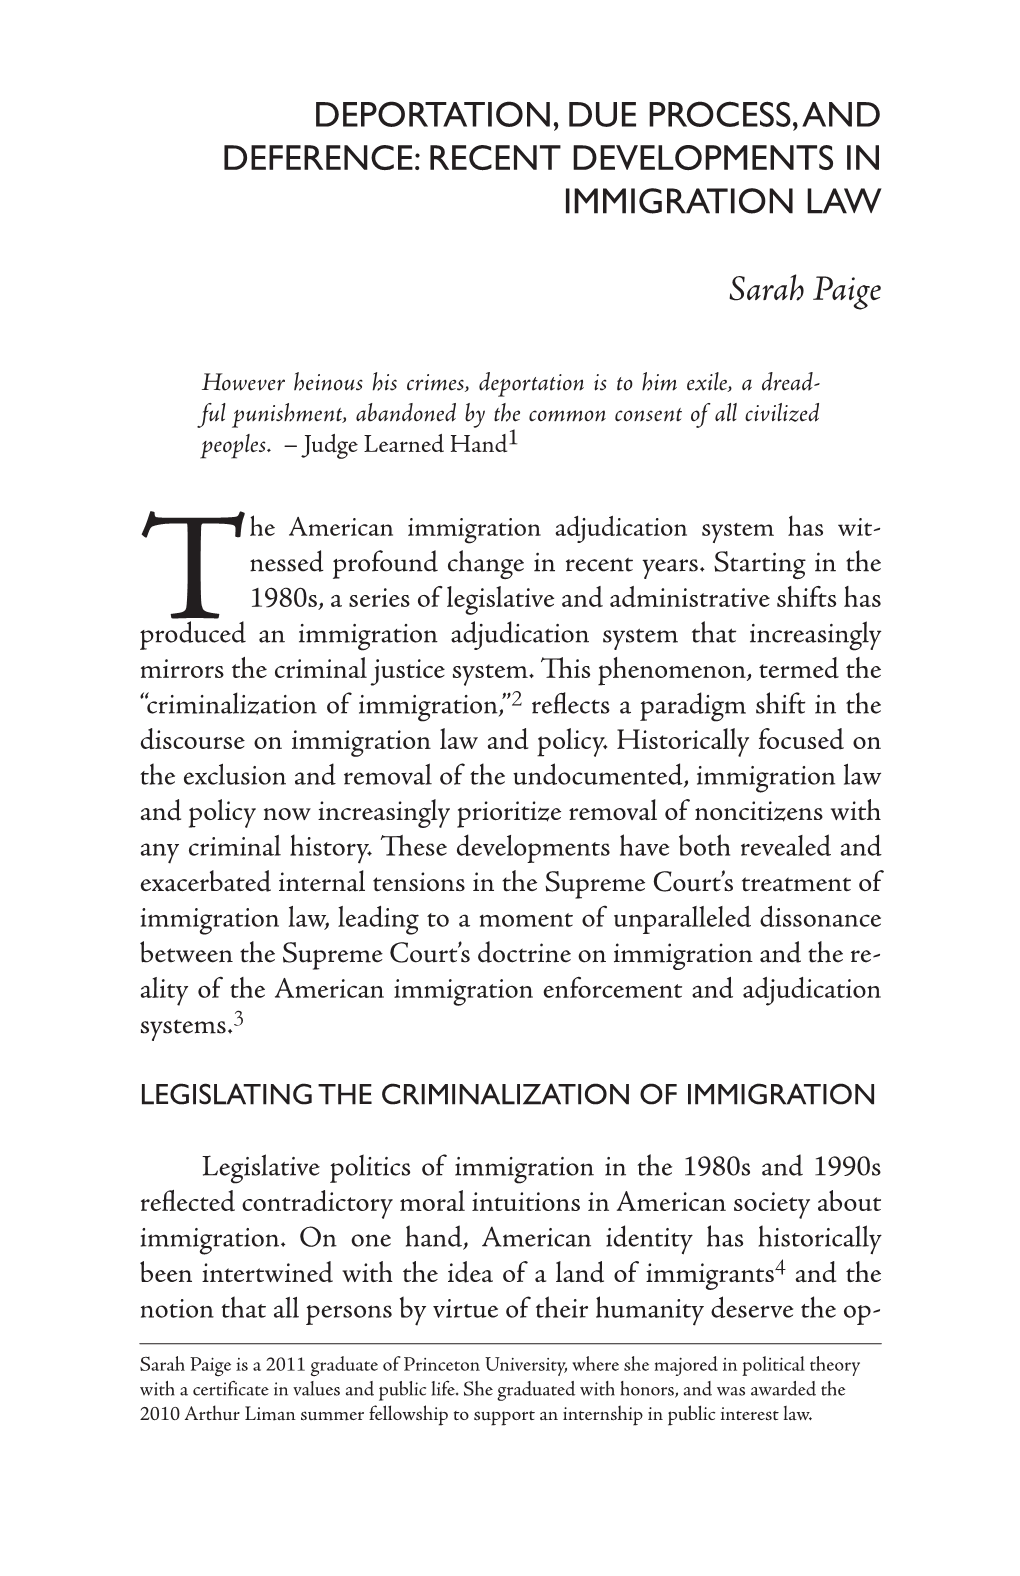 Deportation, Due Process, and Deference: Recent Developments in Immigration Law